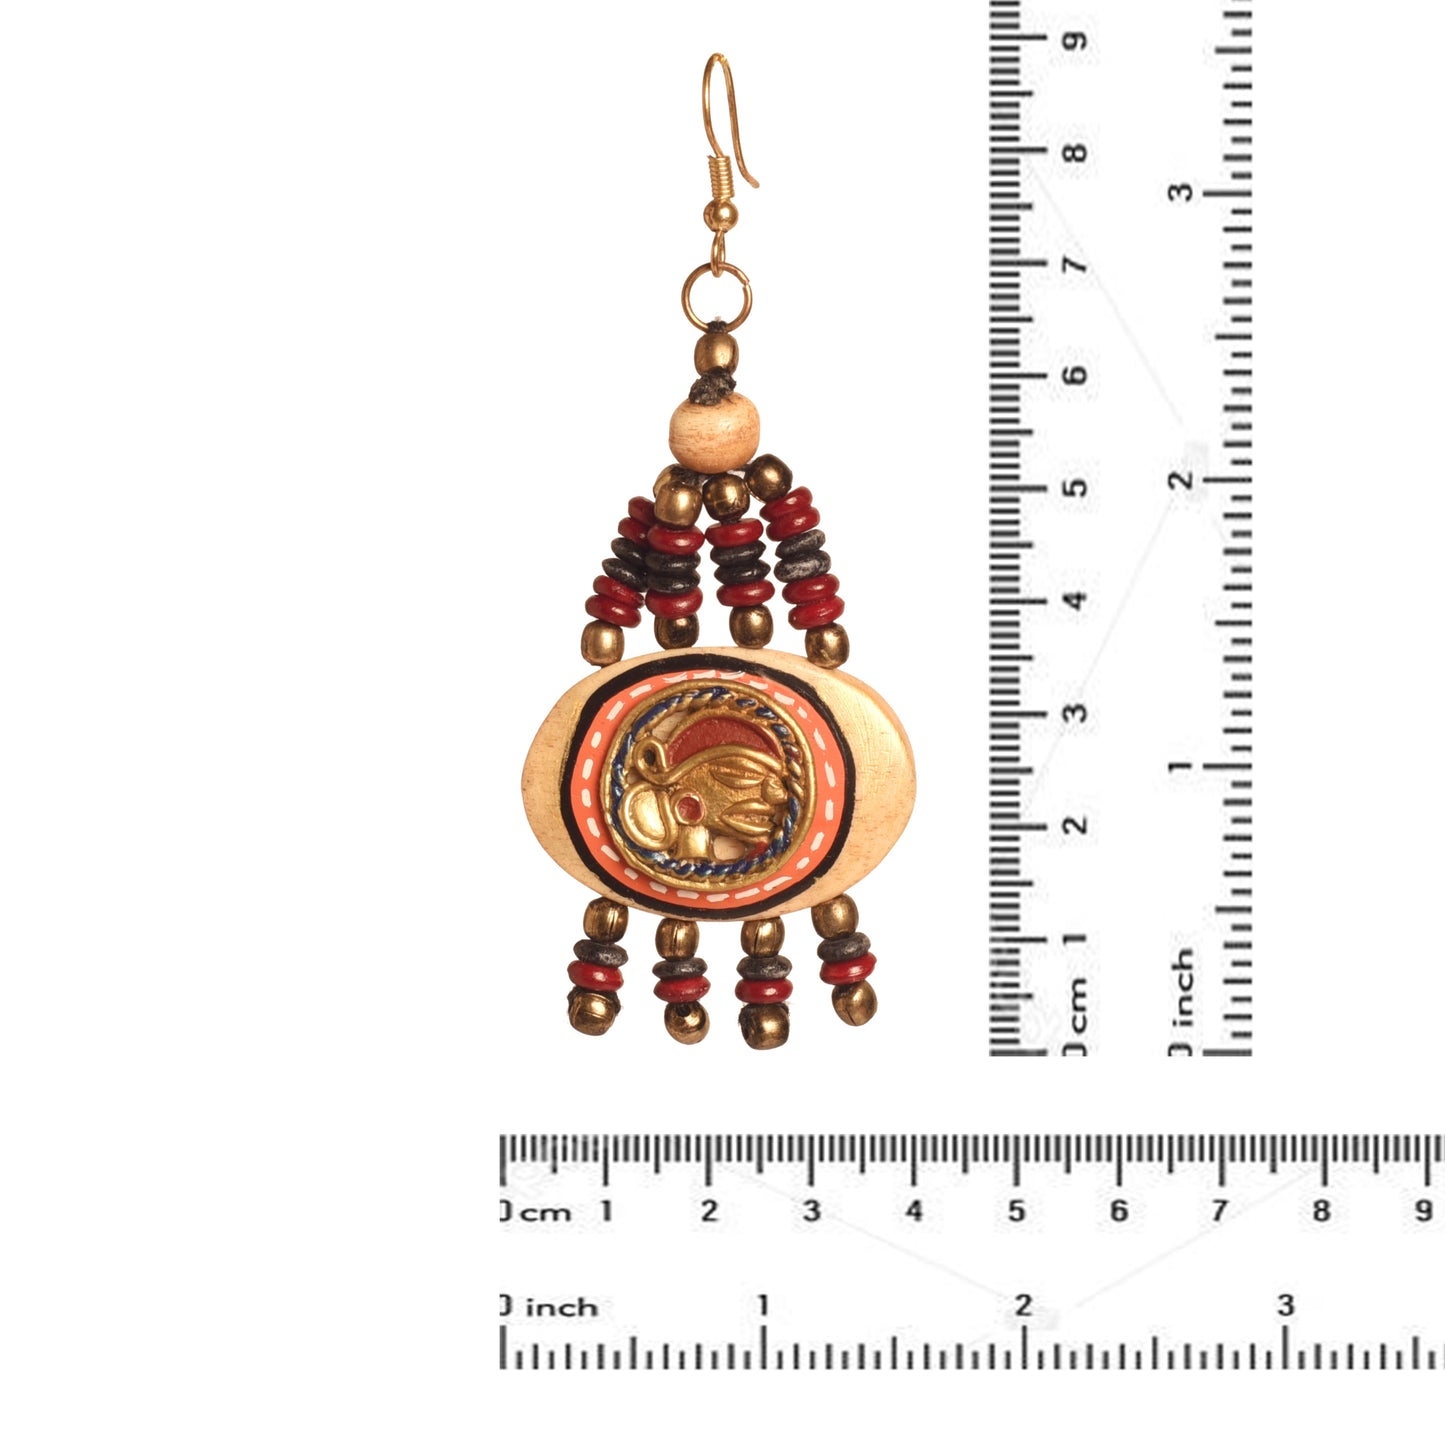 The Empress Handcrafted Tribal Dhokra Earrings in Maroon